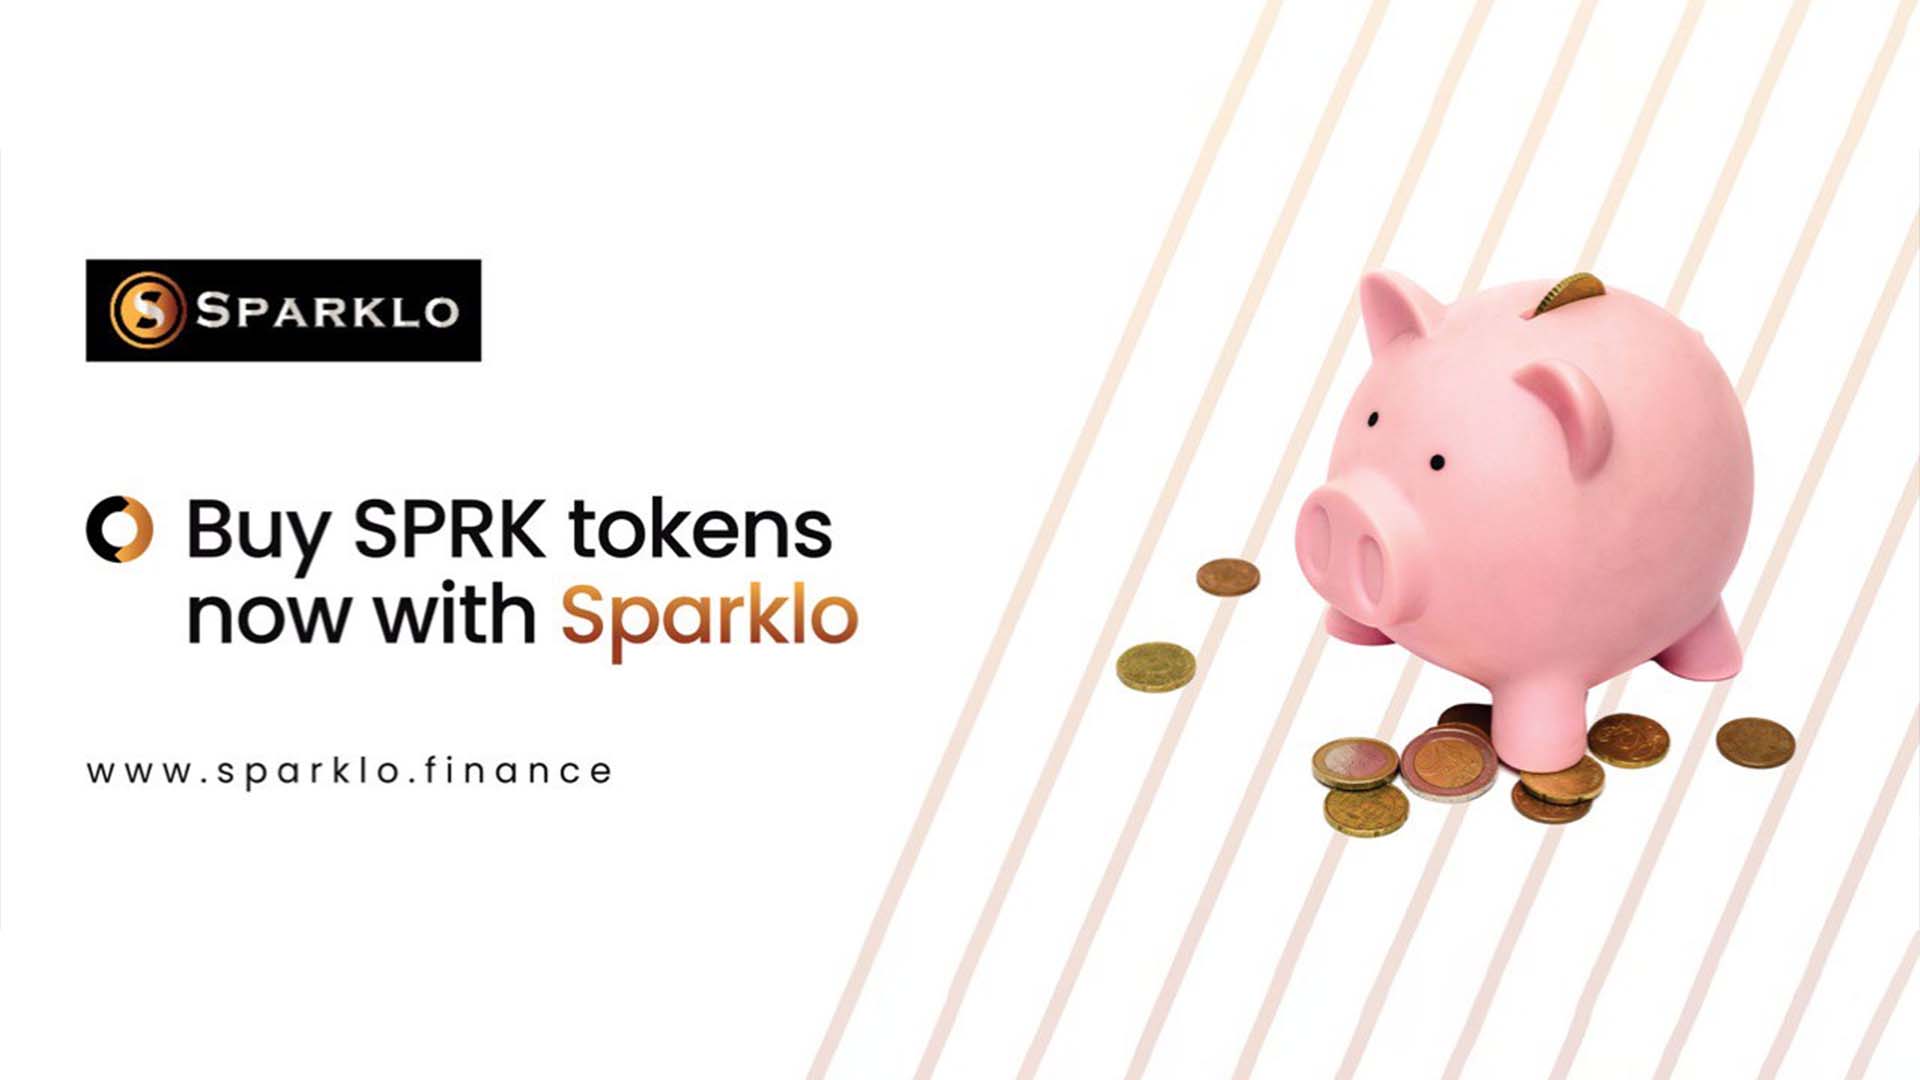 Stellar, Toncoin, and Sparklo (SPRK): Three Cryptocurrencies to Watch Out For